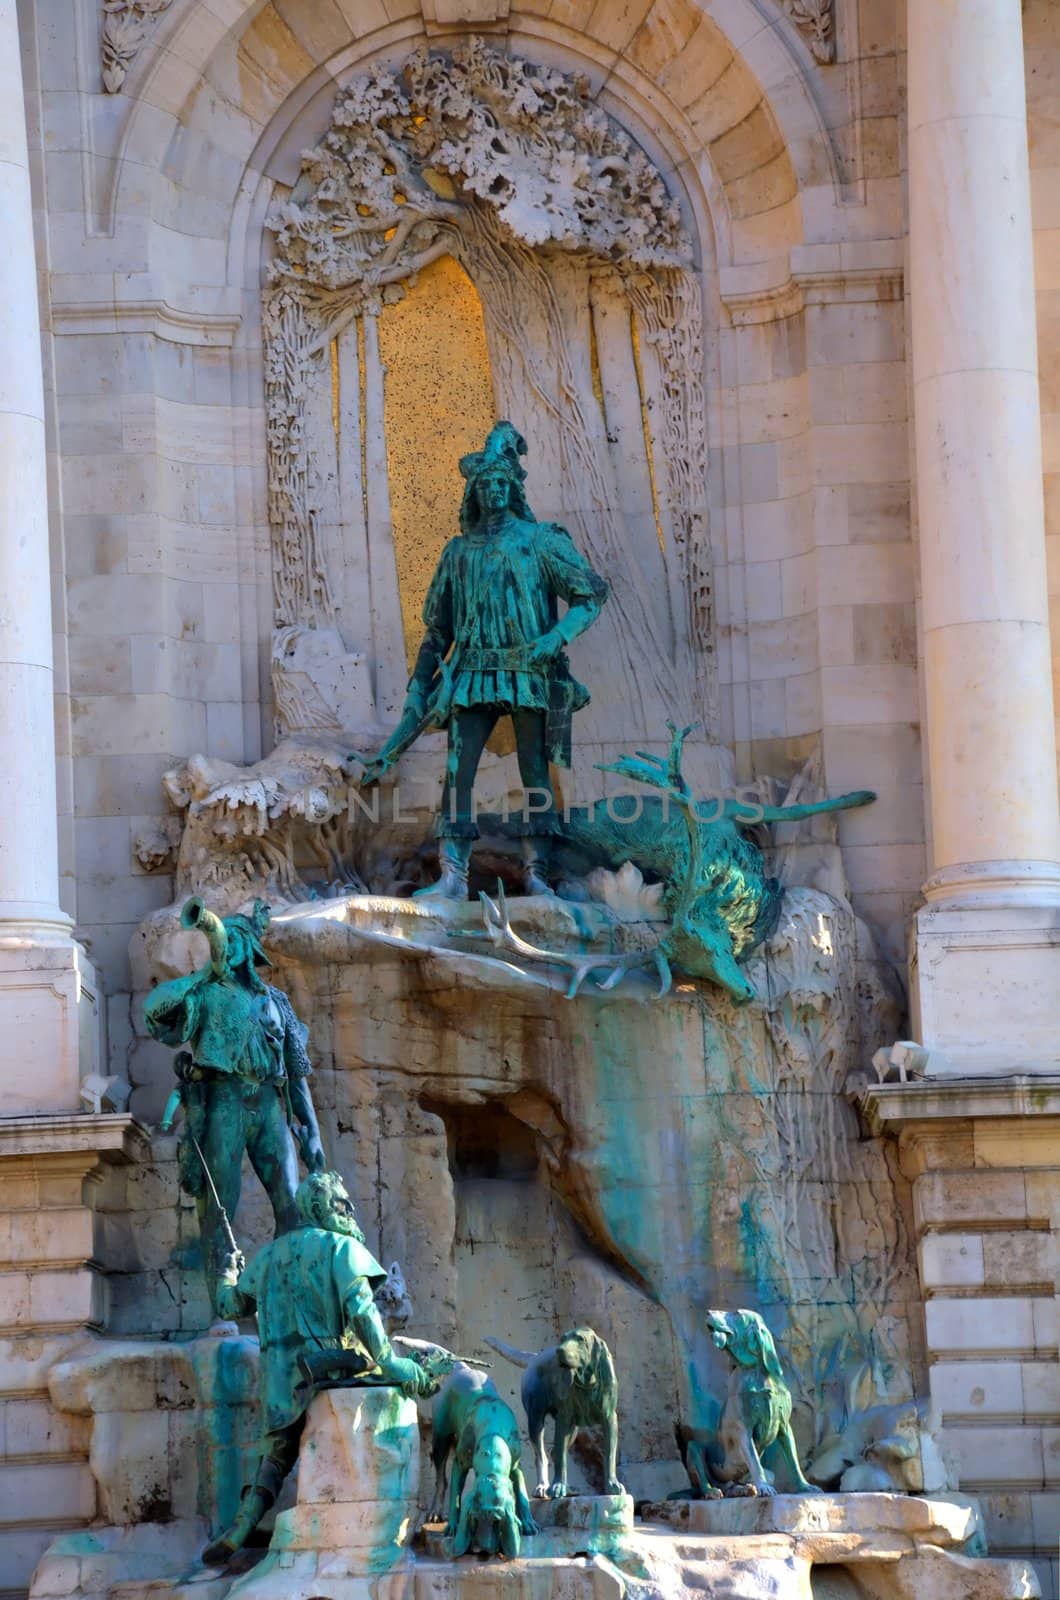 statue in budapest, hungary